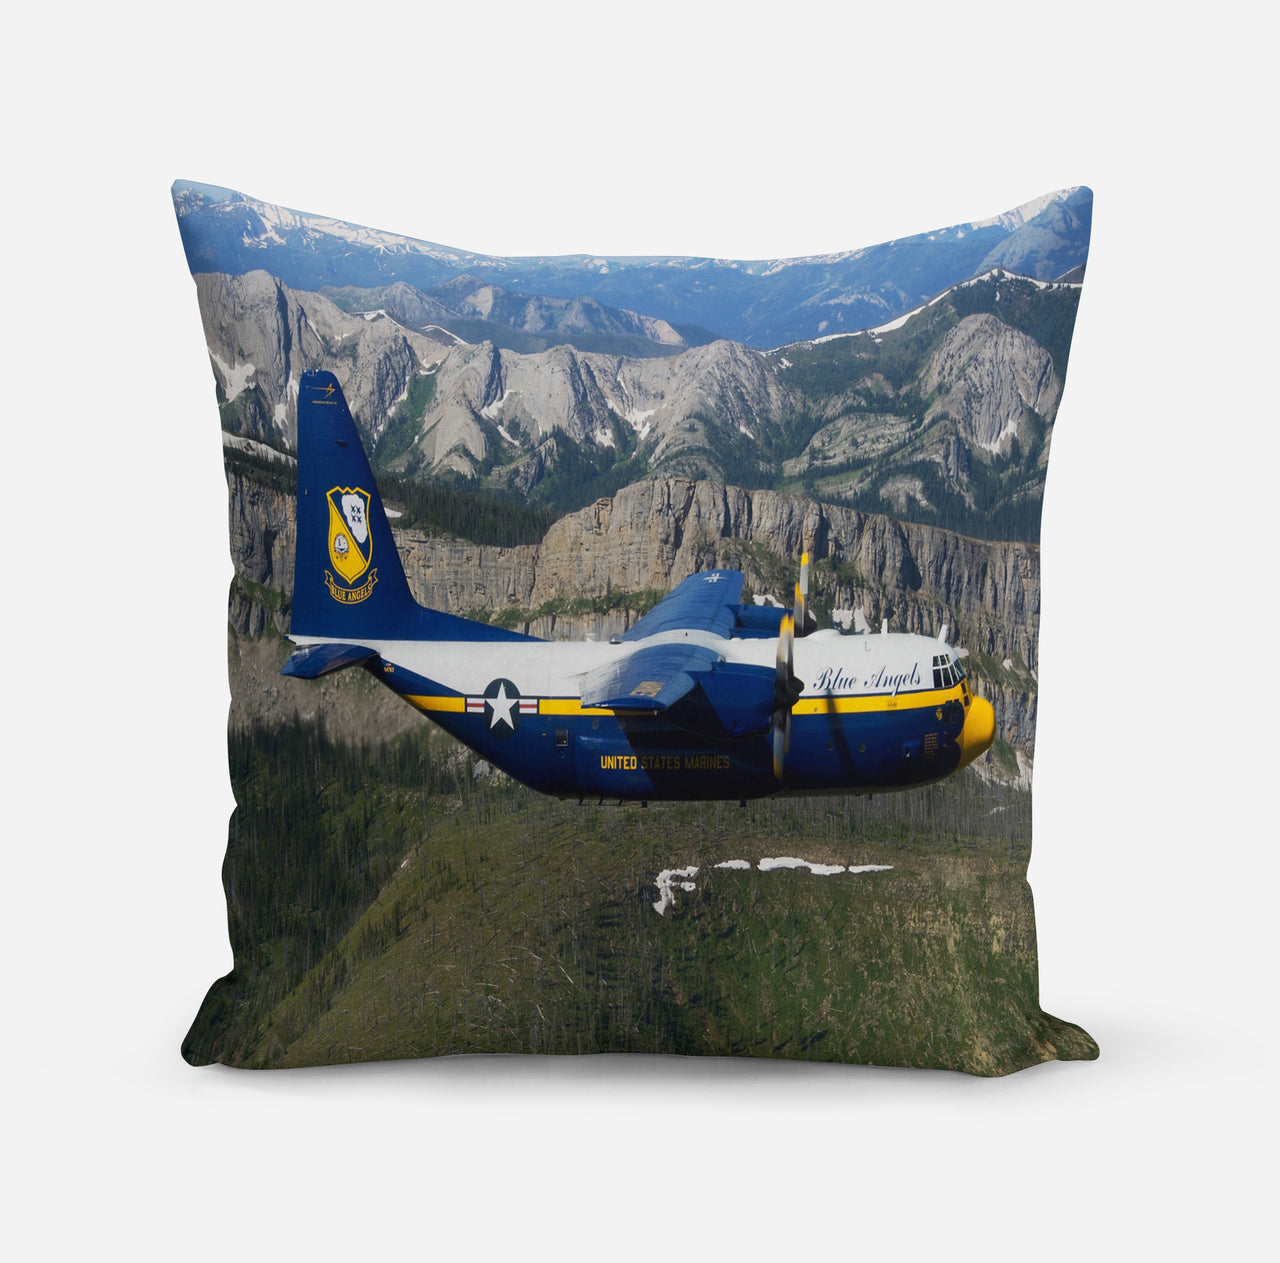 Amazing View with Blue Angels Aircraft Designed Pillows